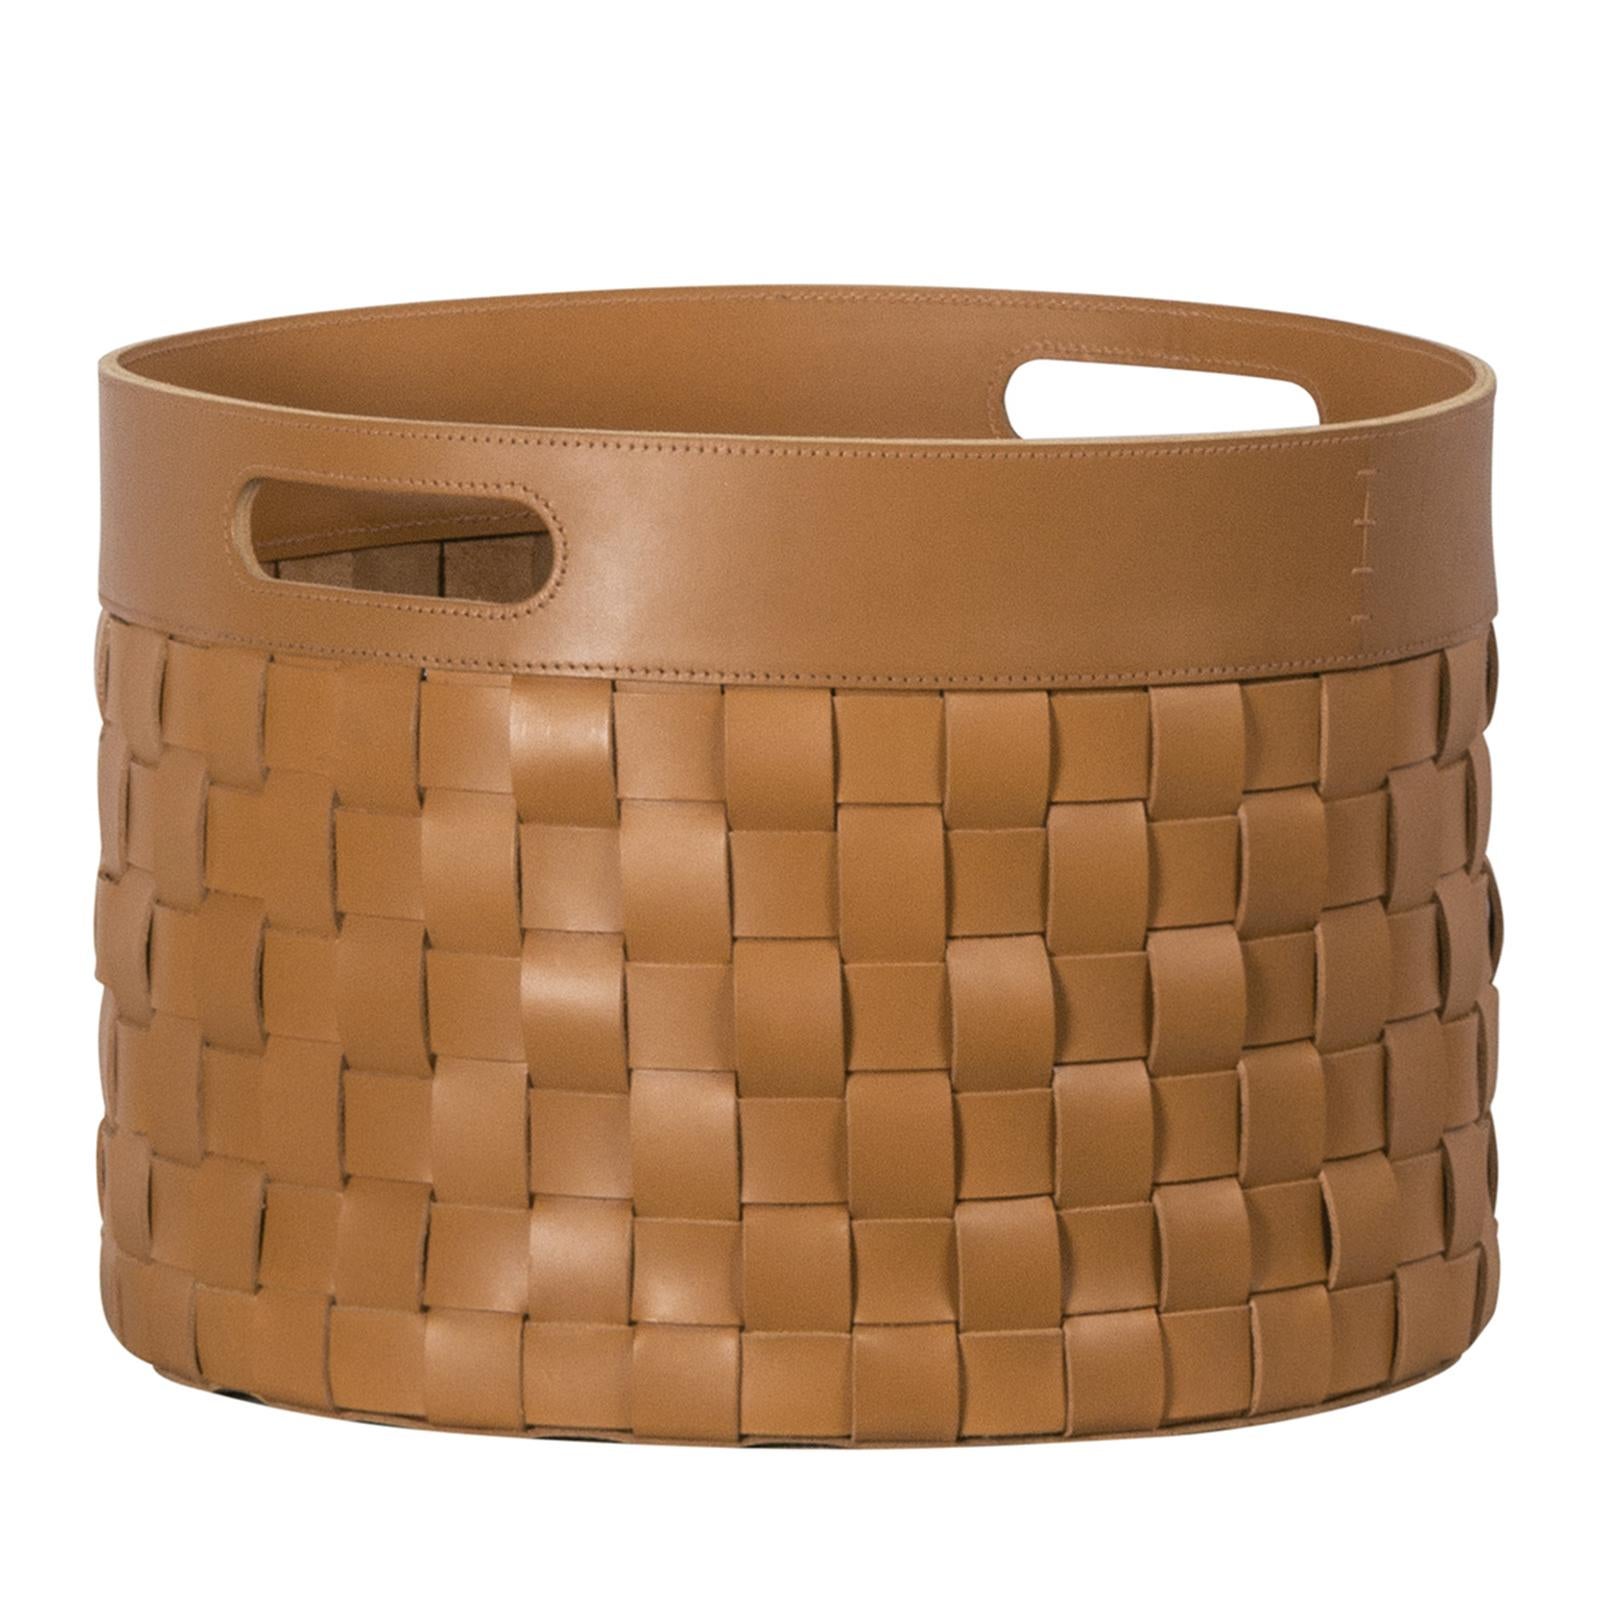 This exquisite storage basket is a precious object that is both functional and striking, thanks to the fine leather that has been dyed using vegetable fibers. The thick strips of leather are woven to create a unique texture, enhanced by the warm